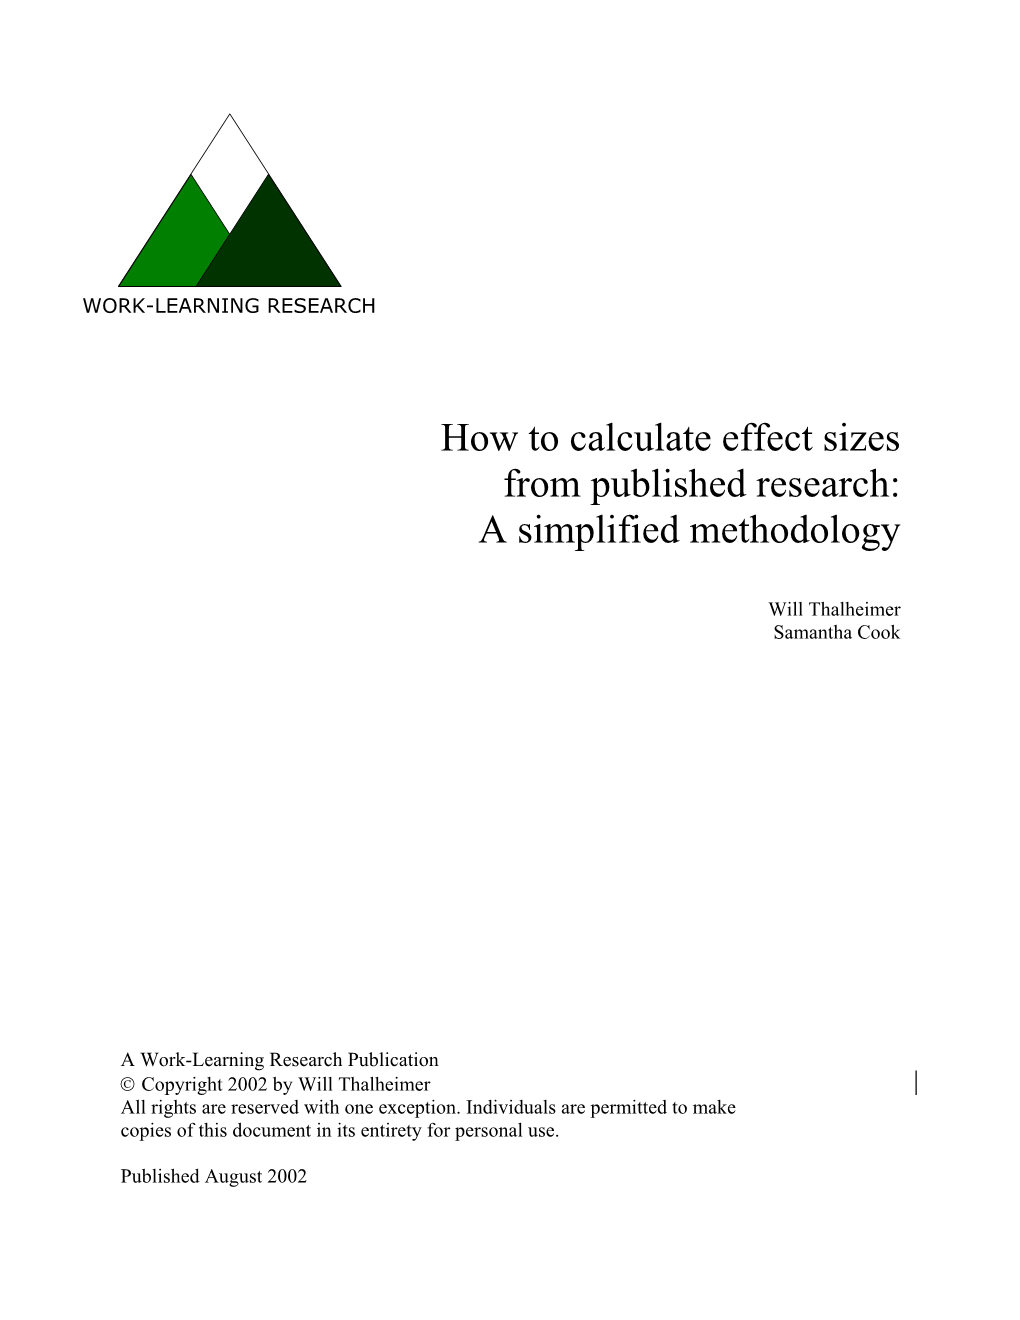 How to Calculate Effect Sizes from Published Research: a Simplified Methodology